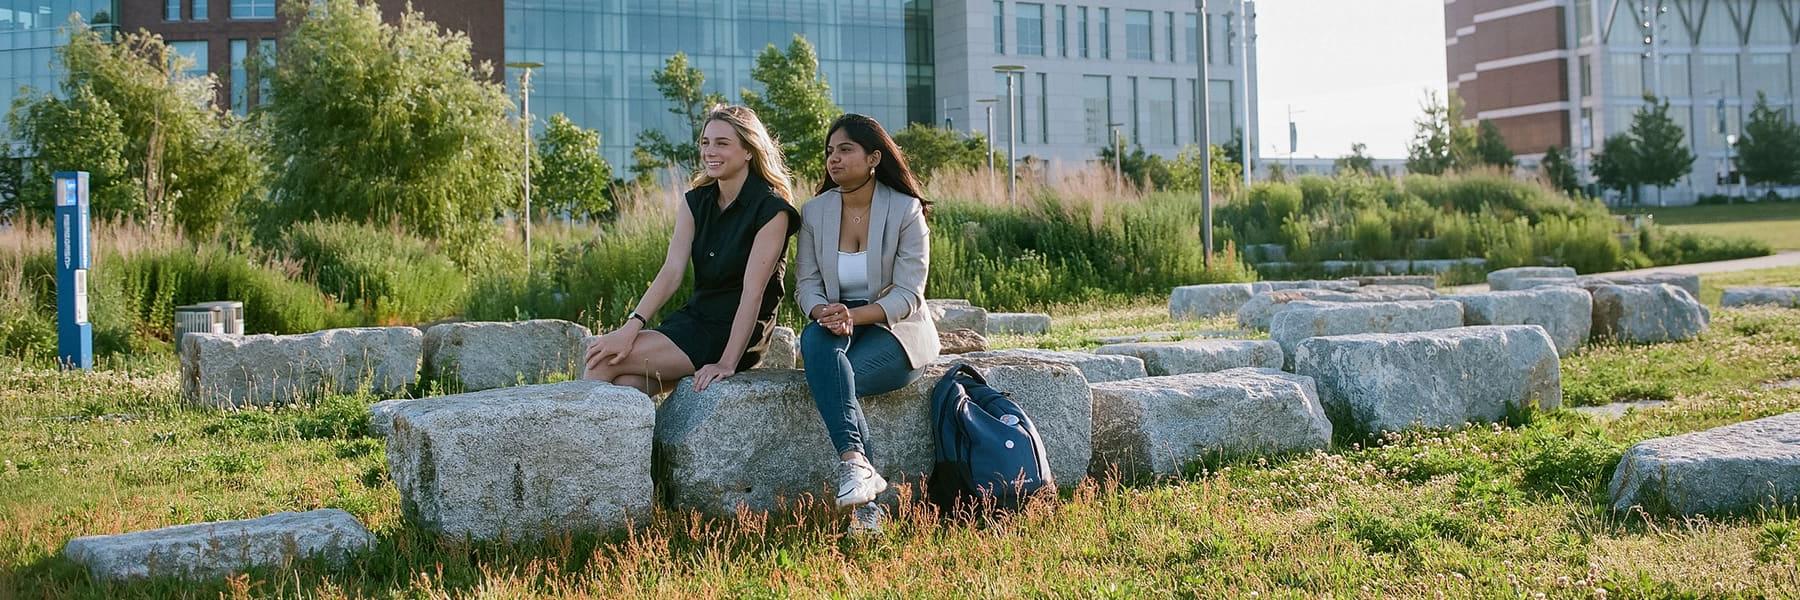 Two students sit on rock benches on campus center lawn.